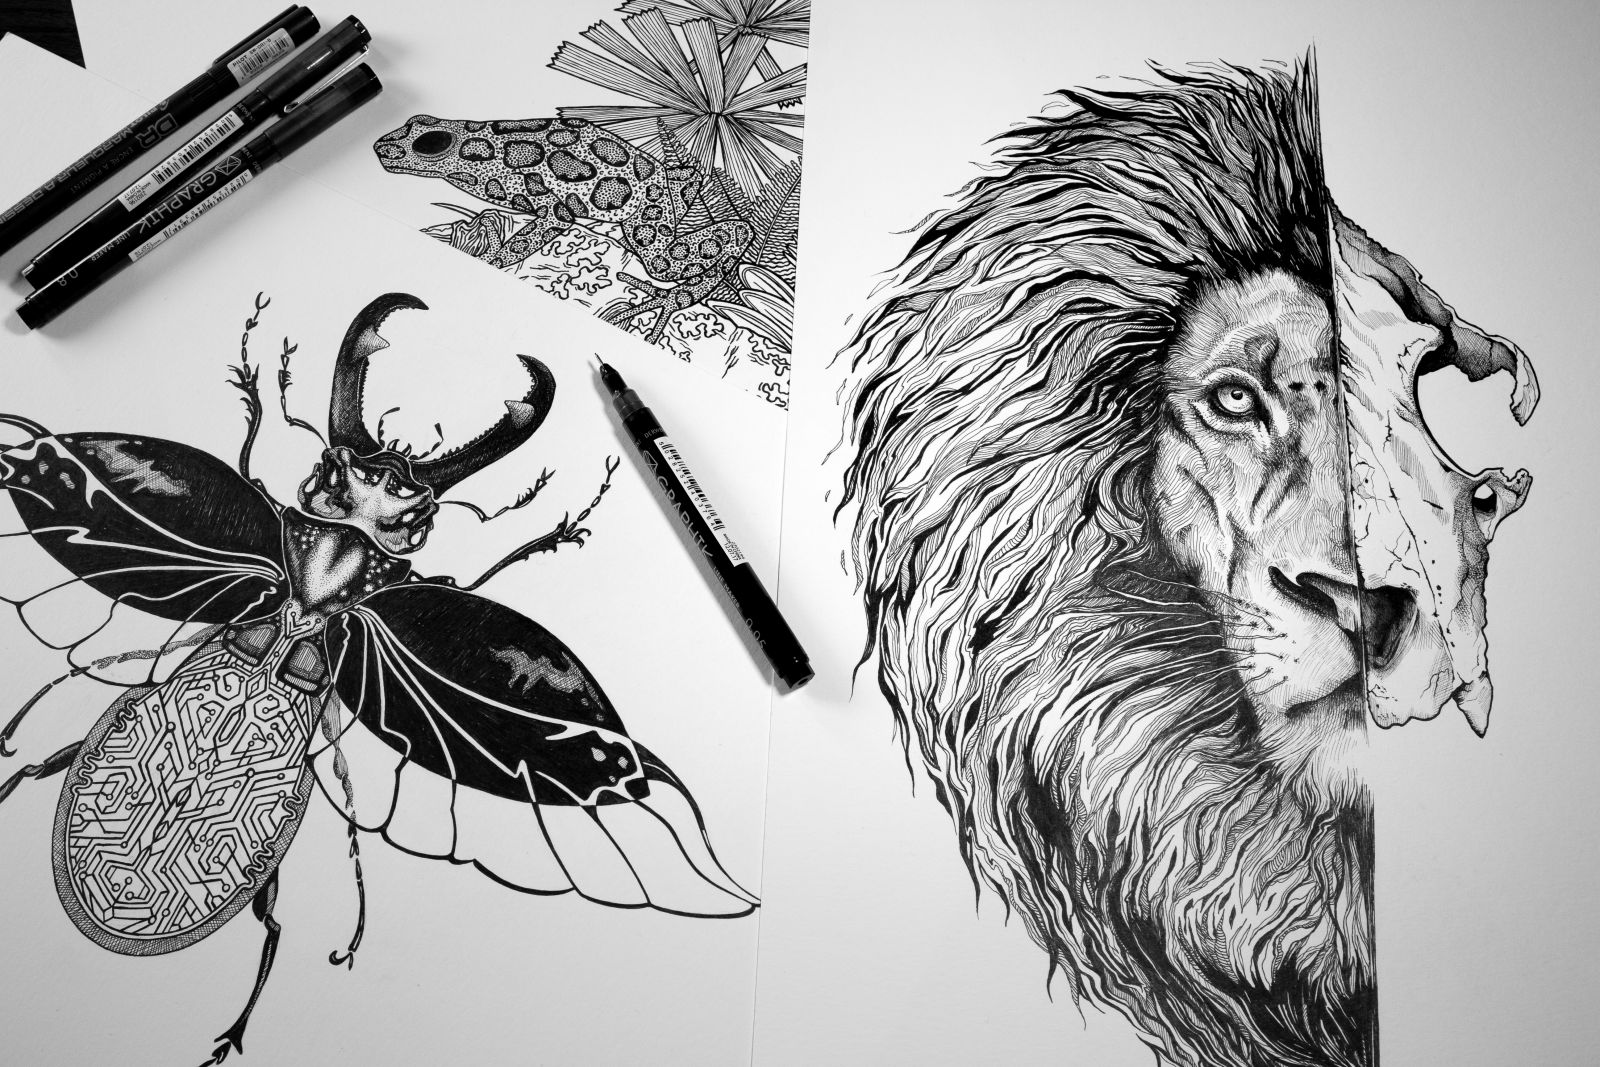 Emily’s intricate designs depict endangered species 